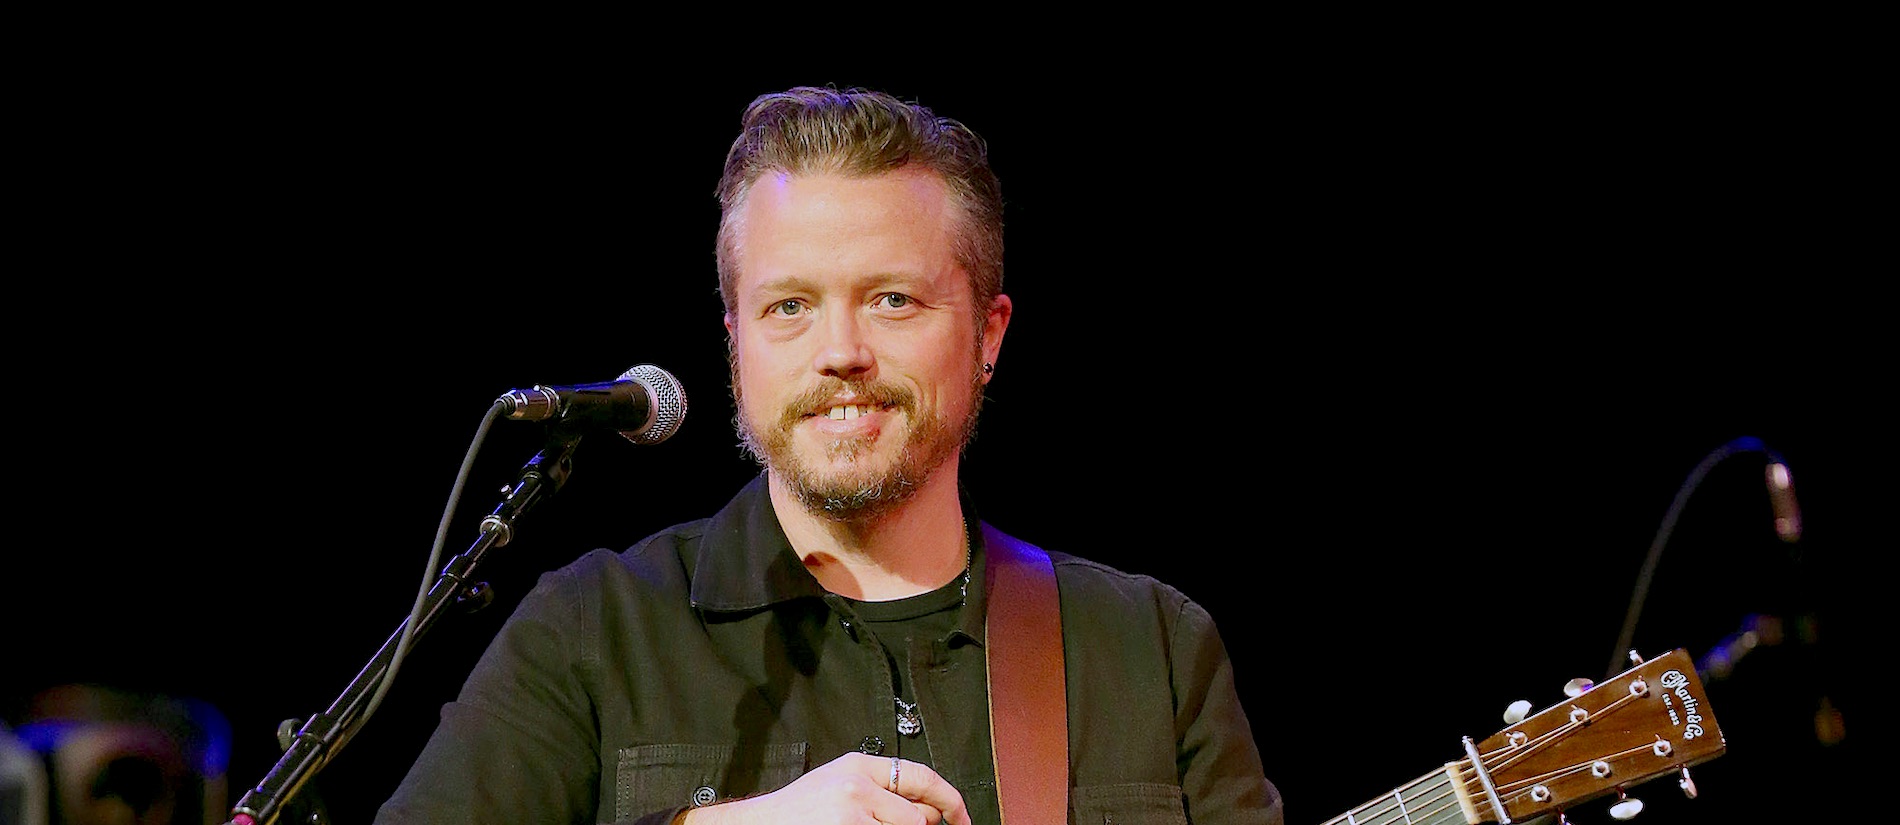 Jason Isbell And The 400 Unit Are Going On Tour In 2021 With Lucinda